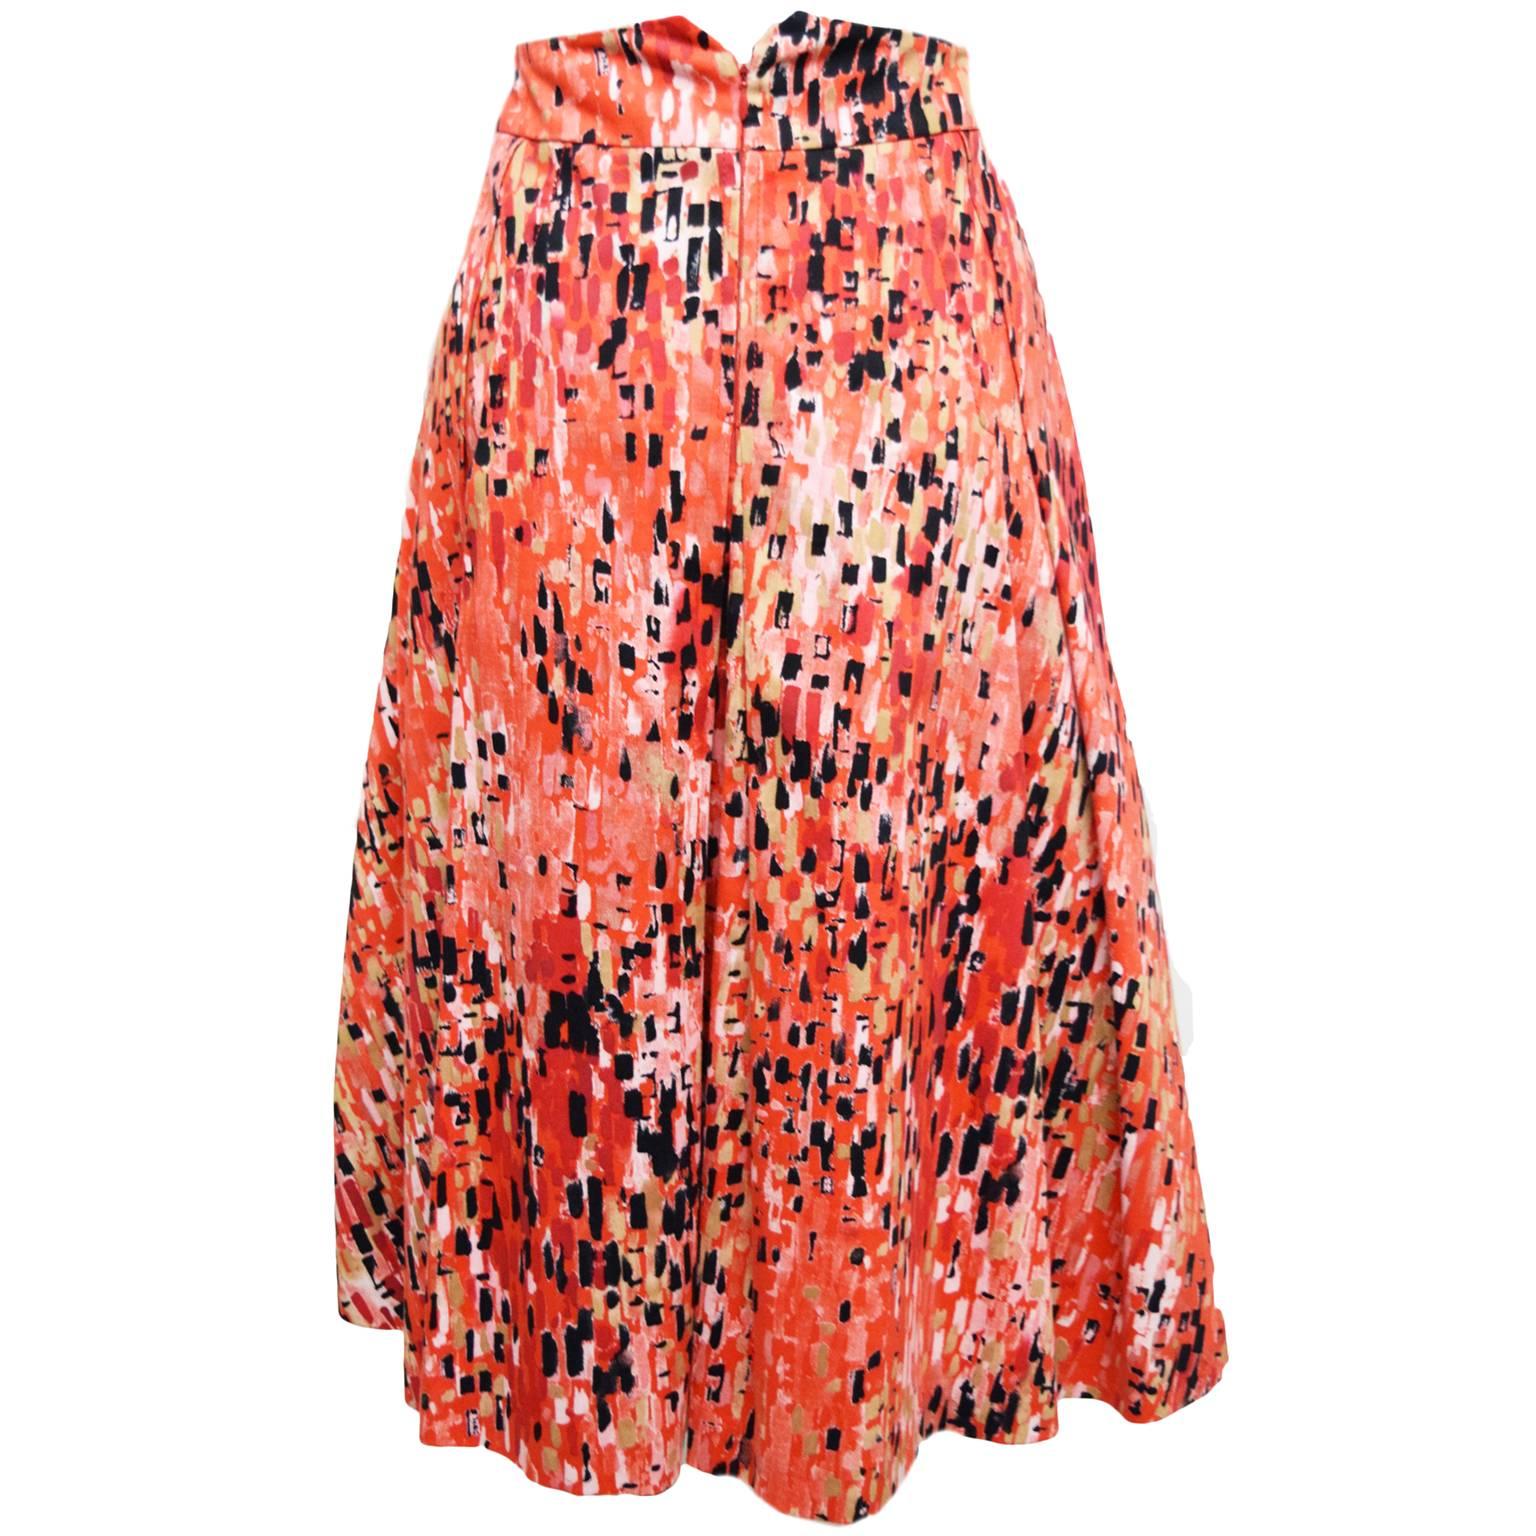 This Carolina Herrera  piece is a great statement to have in your closet. The skirt is a abstract printed skirt and is 100% cotton. The lining is a soft silk taffeta to give is a nice body and shape. Knife pleats and back zip closure. 